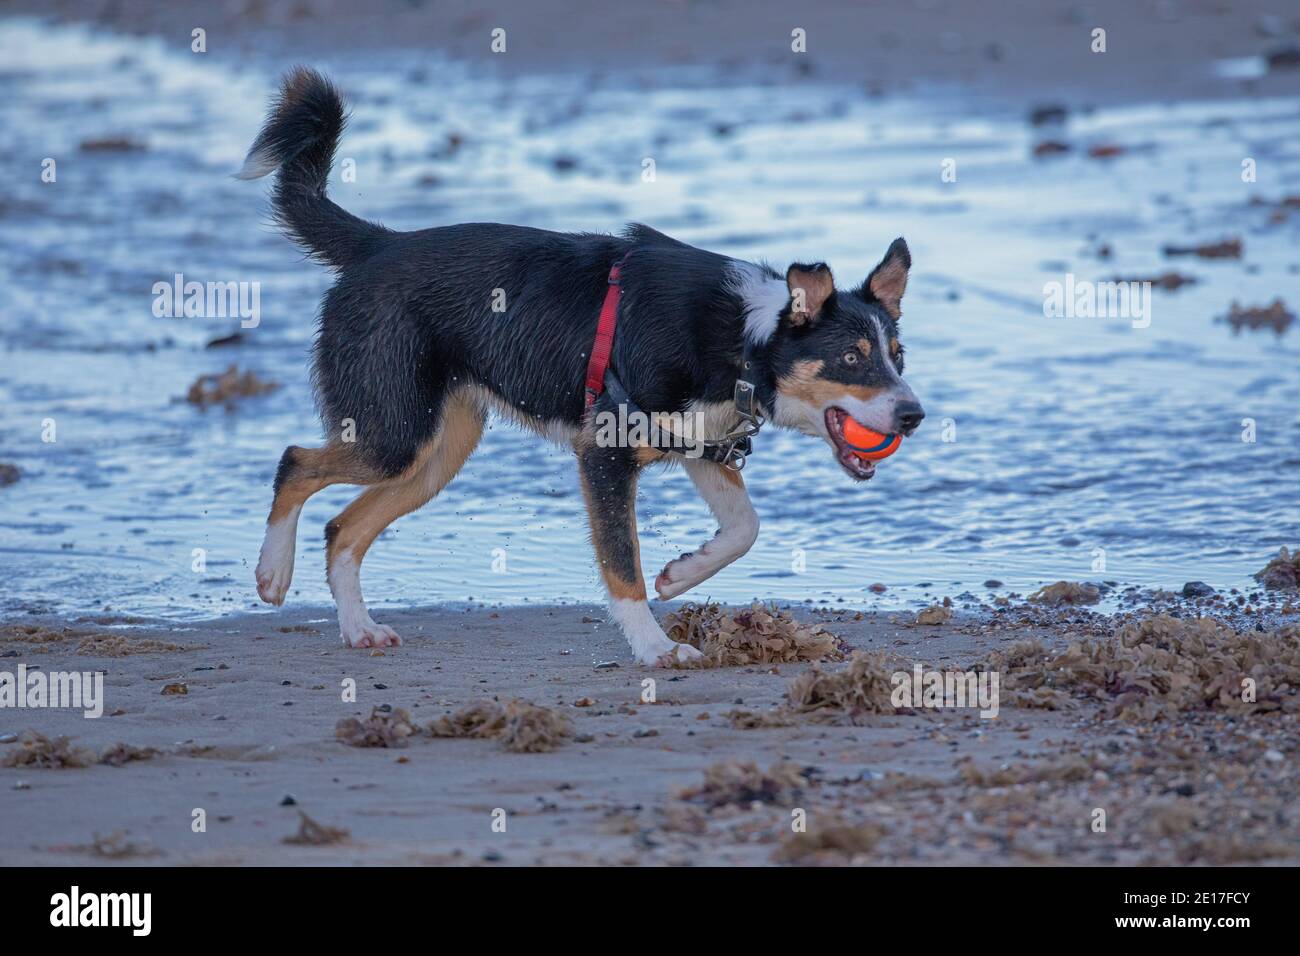 Tri-coloured Border Collie Dog (Canis familiaris). Pet, companion, returning from sea water, fetching, carrying ball in mouth. Sea side beach. Stock Photo